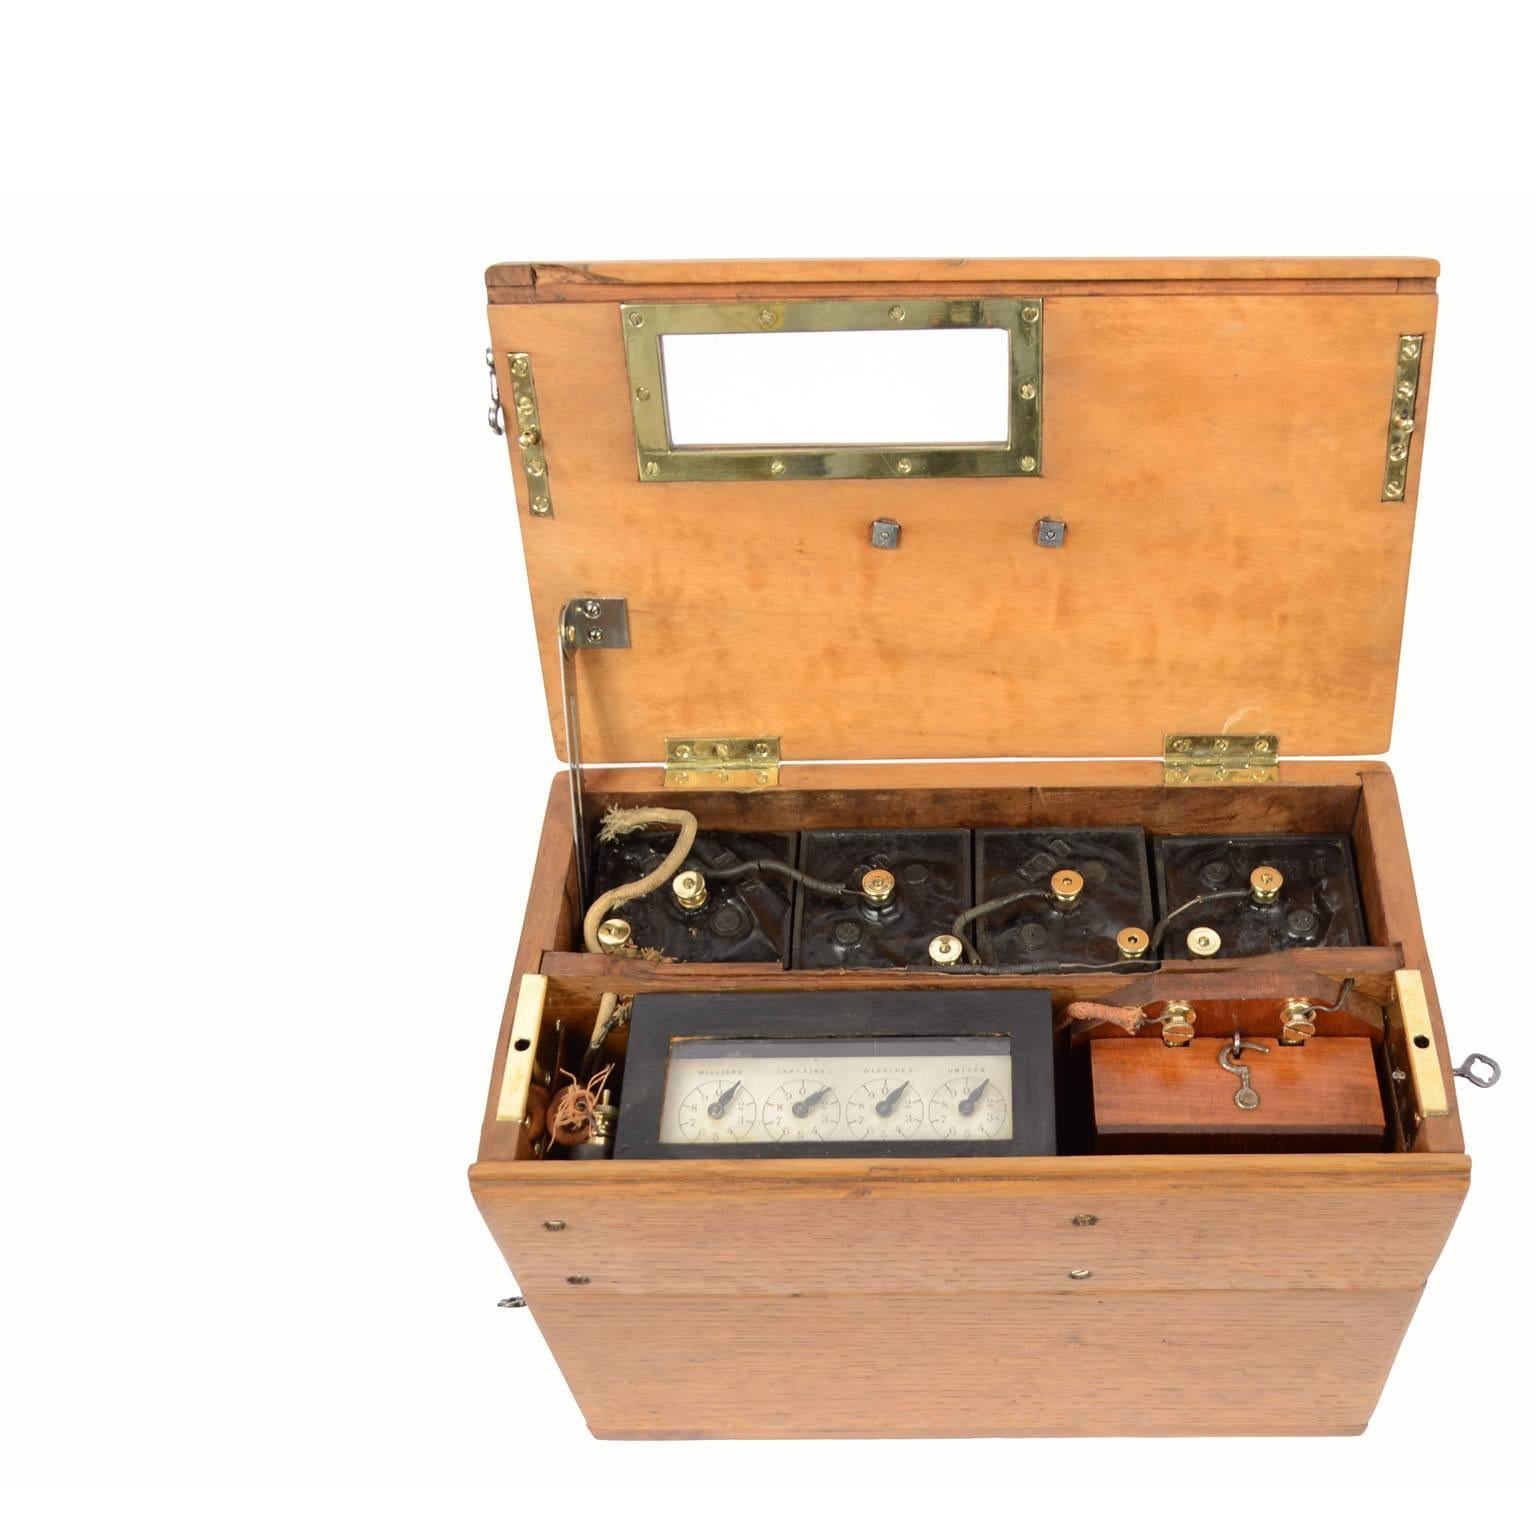 Telegraph power supply with battery-powered bell placed in oakwood box, complete with key. Inside the box there are four scales, tens, hundreds and thousands of turns, bell, four batteries and switch, signed Jules Richard Paris of the second half of